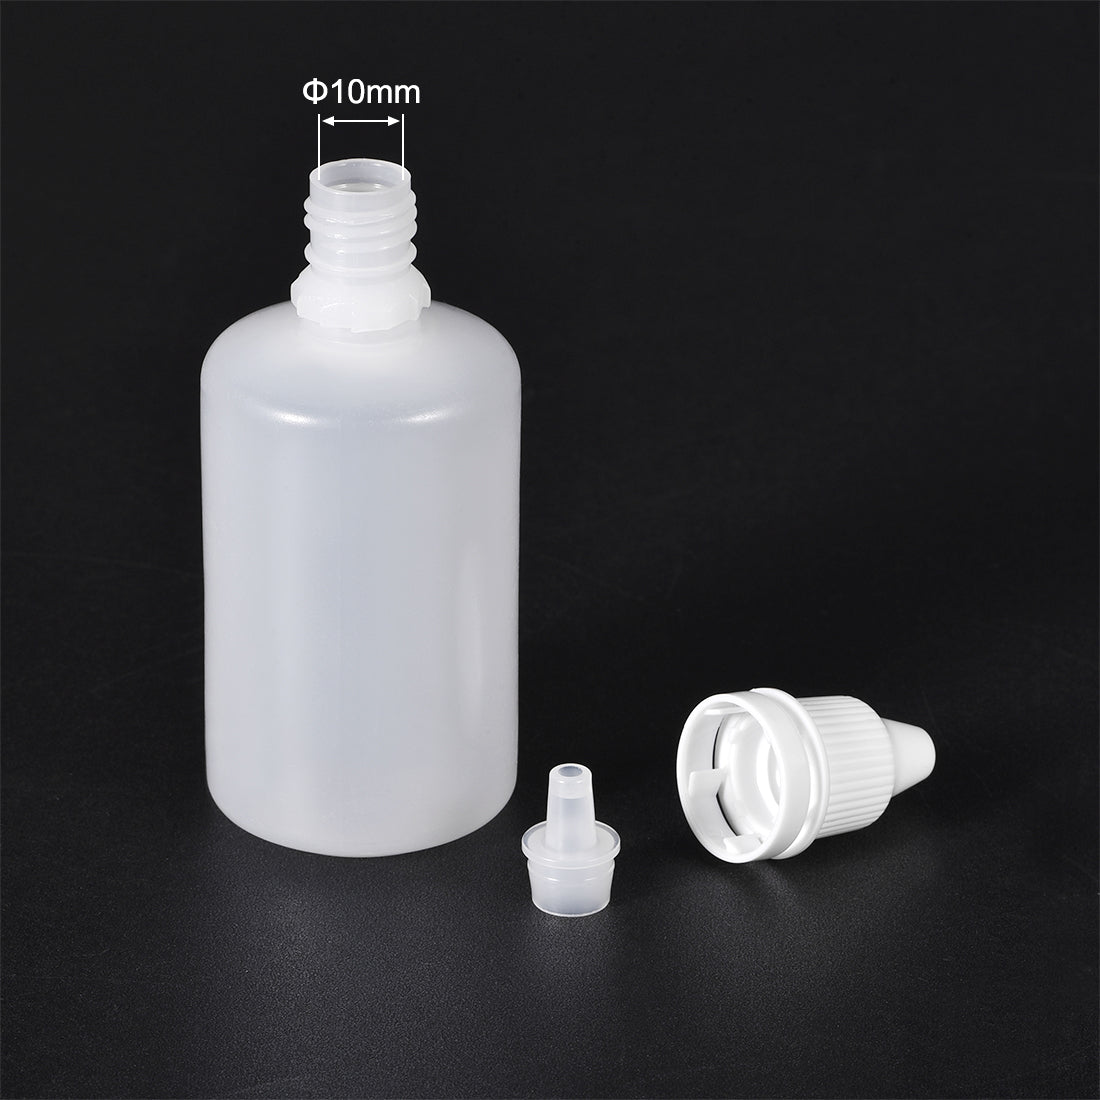 uxcell Uxcell 50ml/1.7 oz Empty Squeezable Dropper Bottle 20pcs